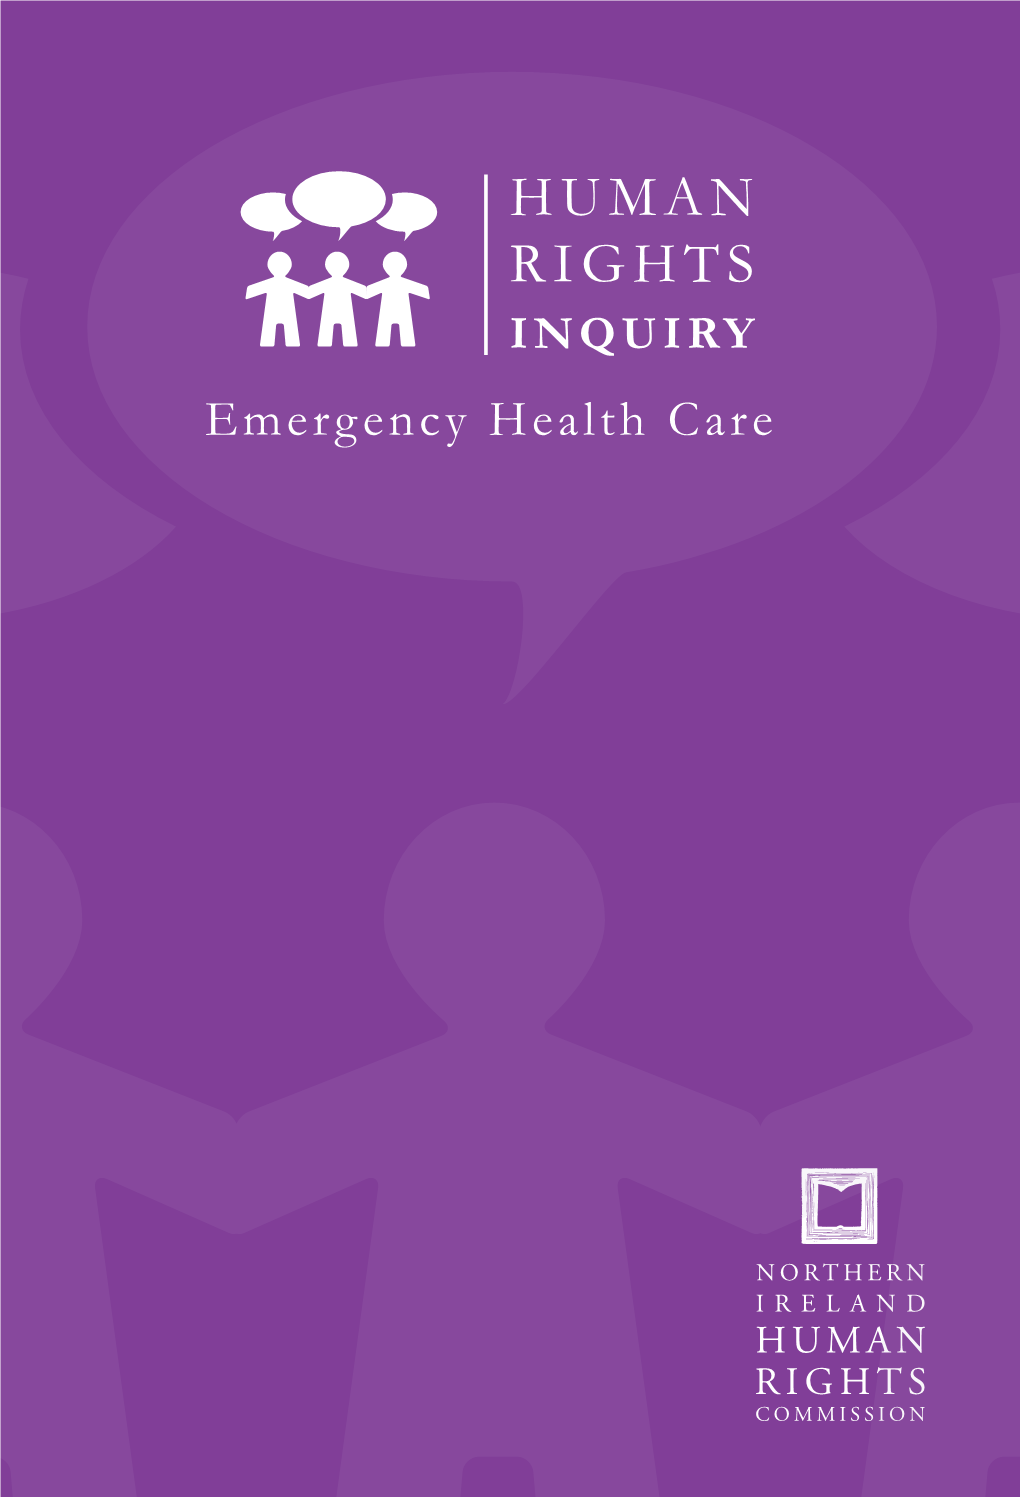 Human Rights Inquiry Emergency Health Care CDS 119941 219492 781910 ISBN 9781910219492 9